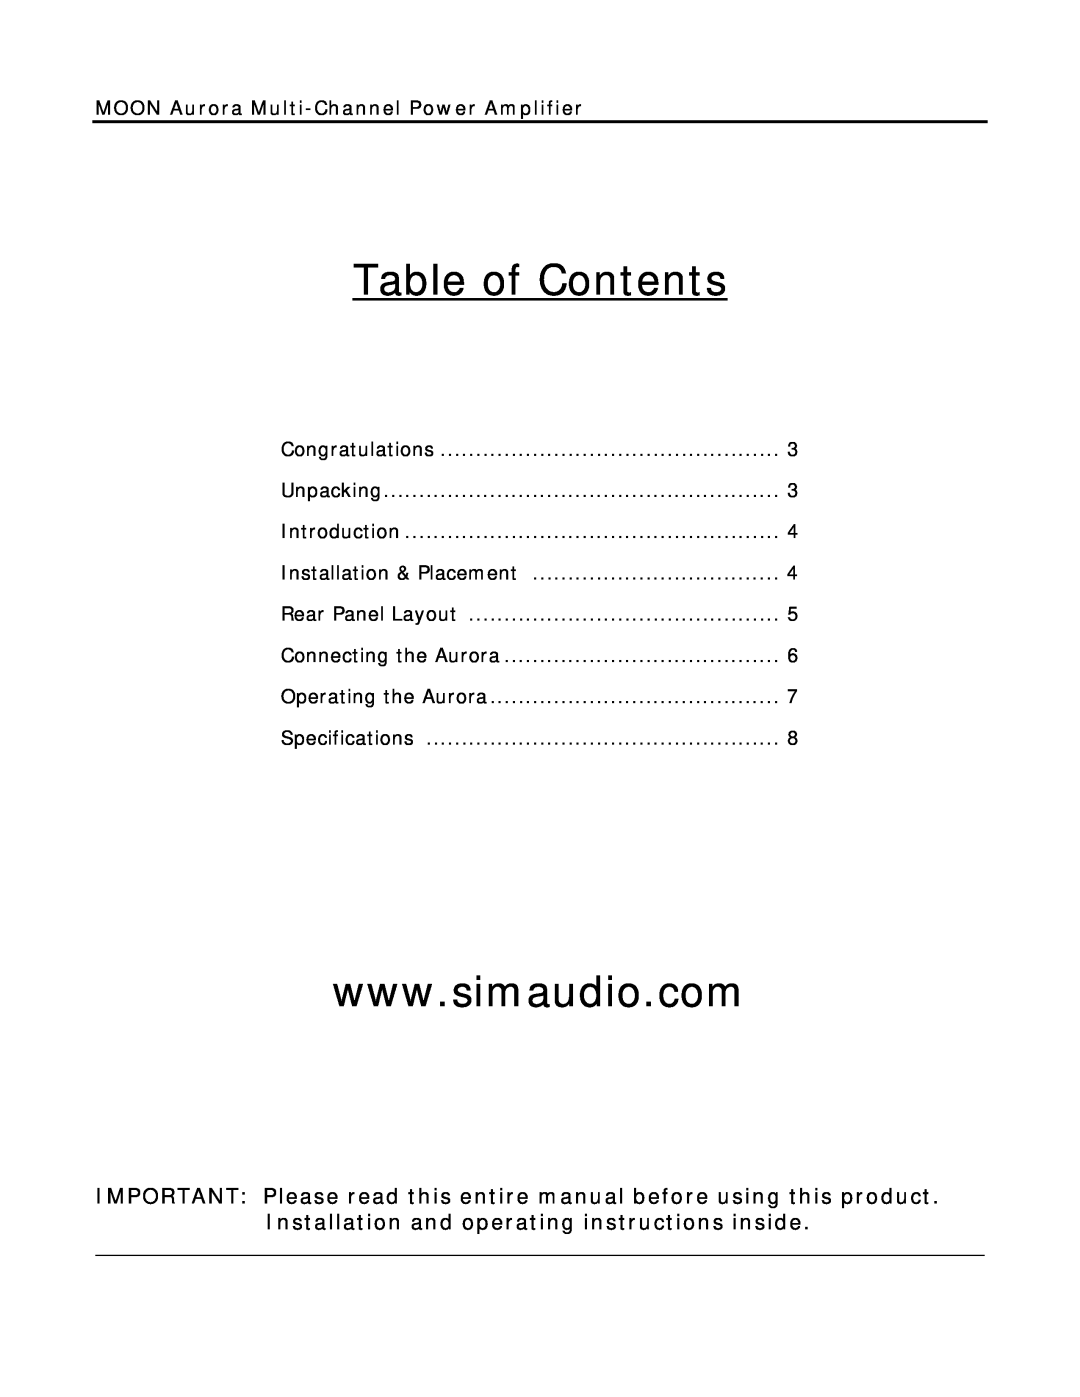 Simaudio AURORA owner manual Table of Contents, MOON Aurora Multi-ChannelPower Amplifier 